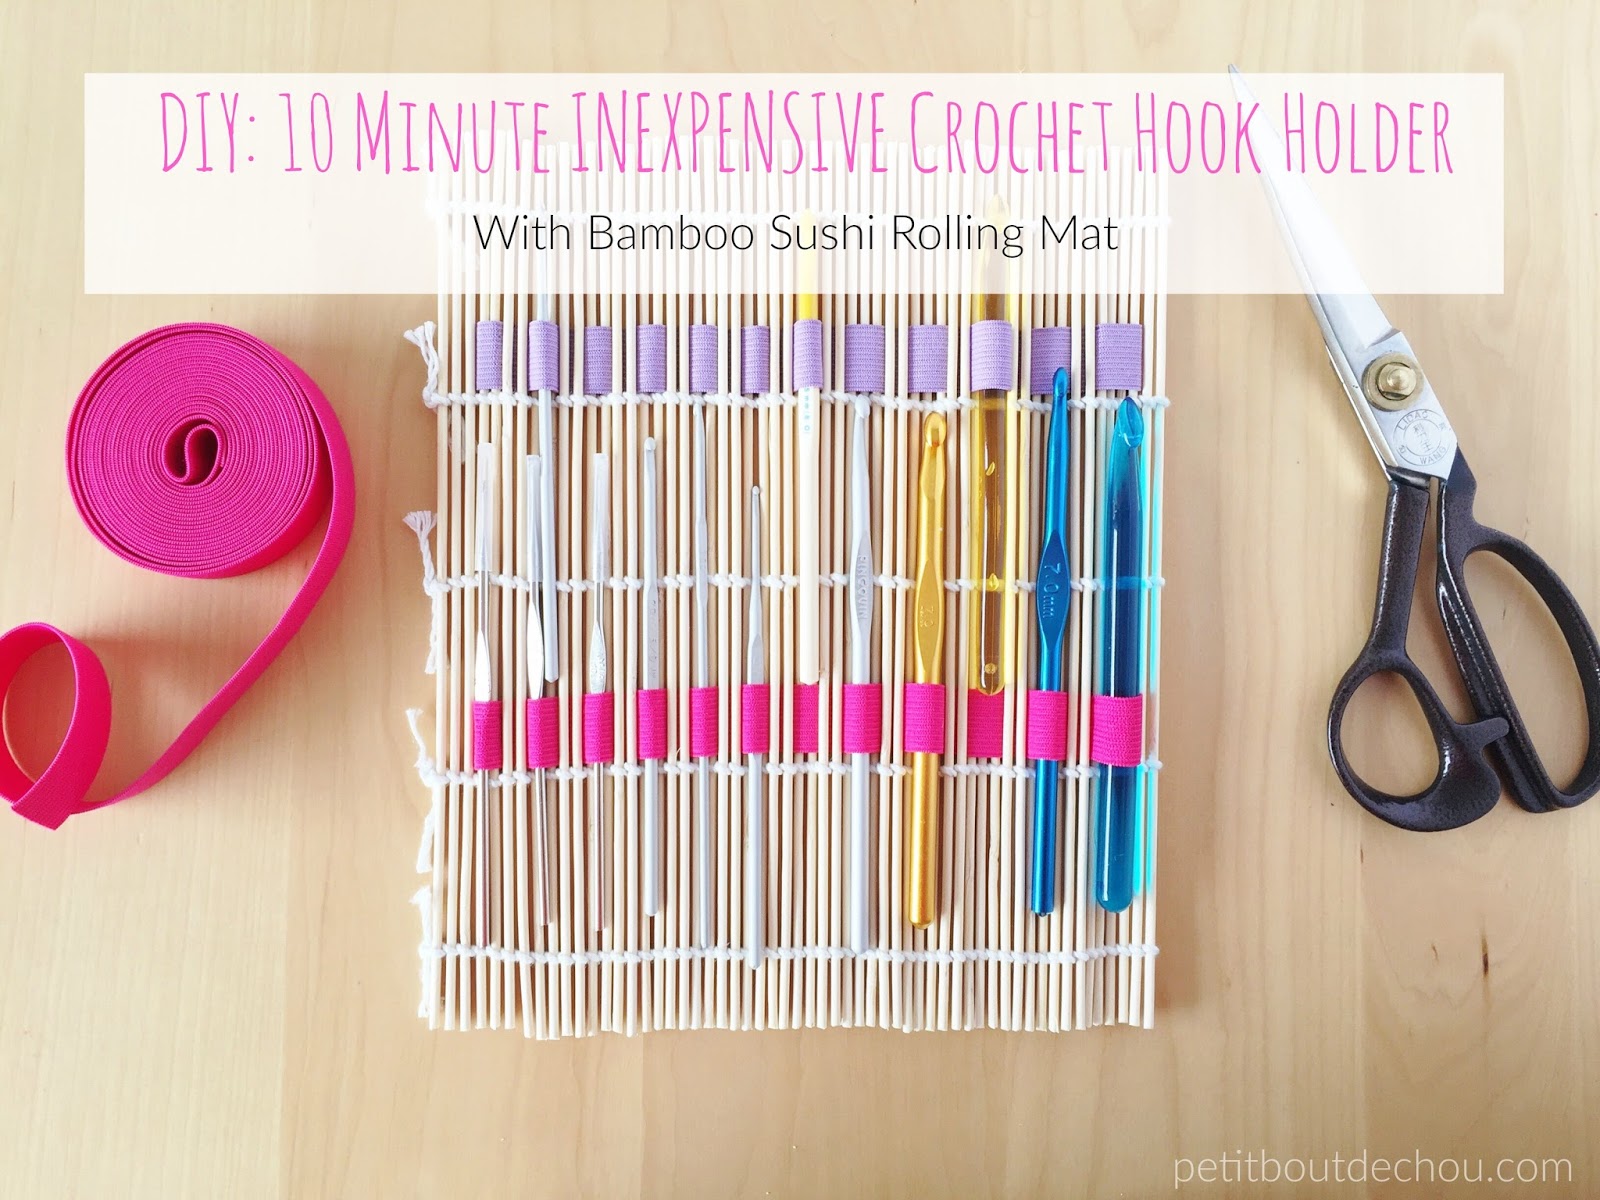 DIY: 10 Minute Inexpensive Crochet Hook Holder with Bamboo Sushi